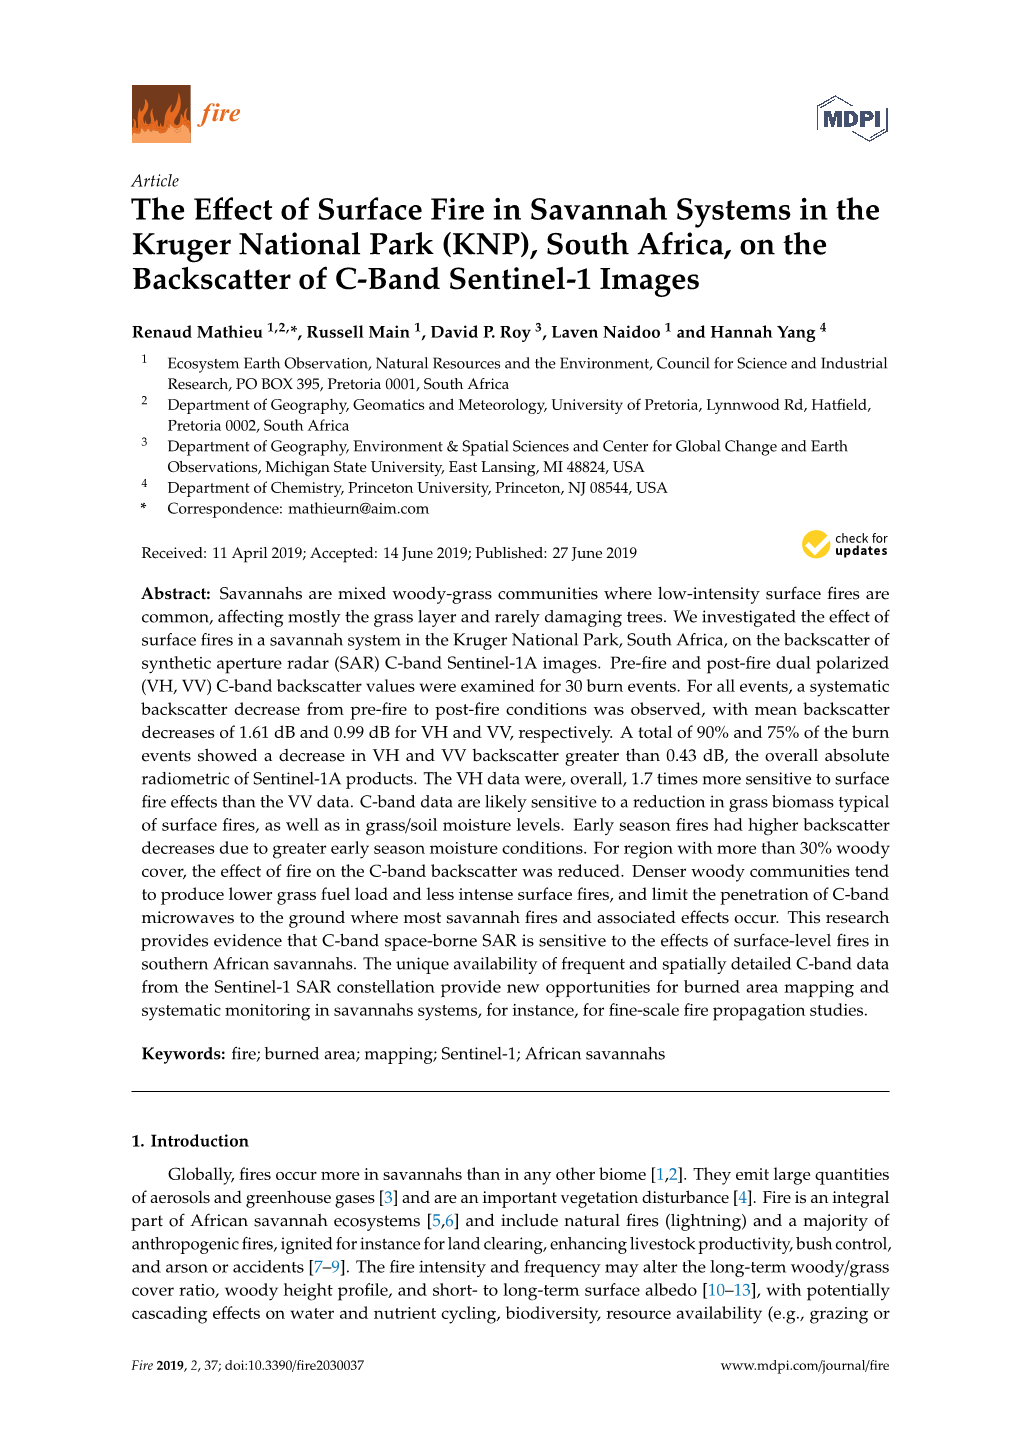 The Effect of Surface Fire in Savannah Systems in the Kruger National Park